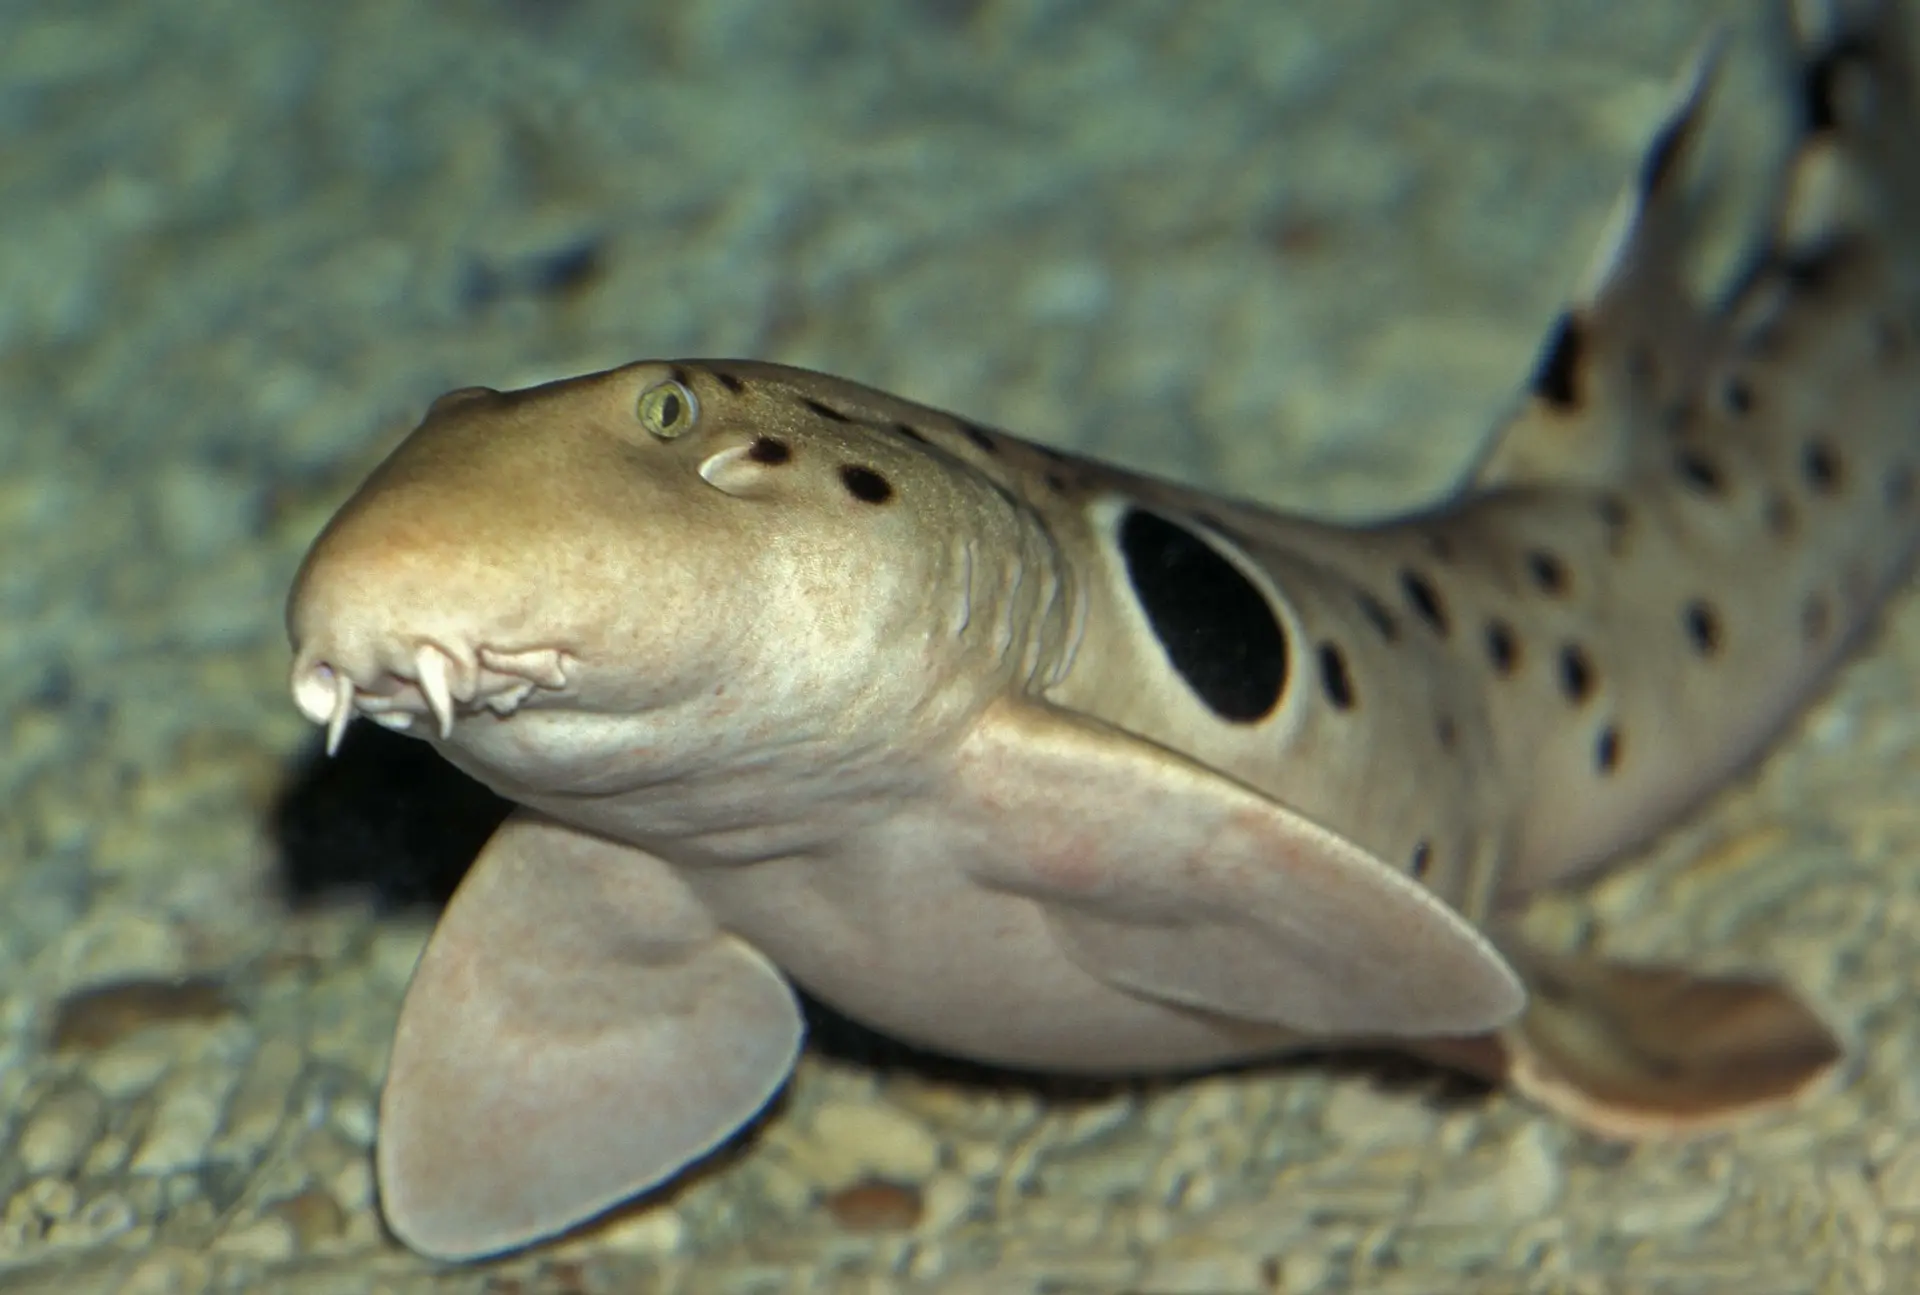 Baby sharks becoming more exhausted, smaller due to climate change